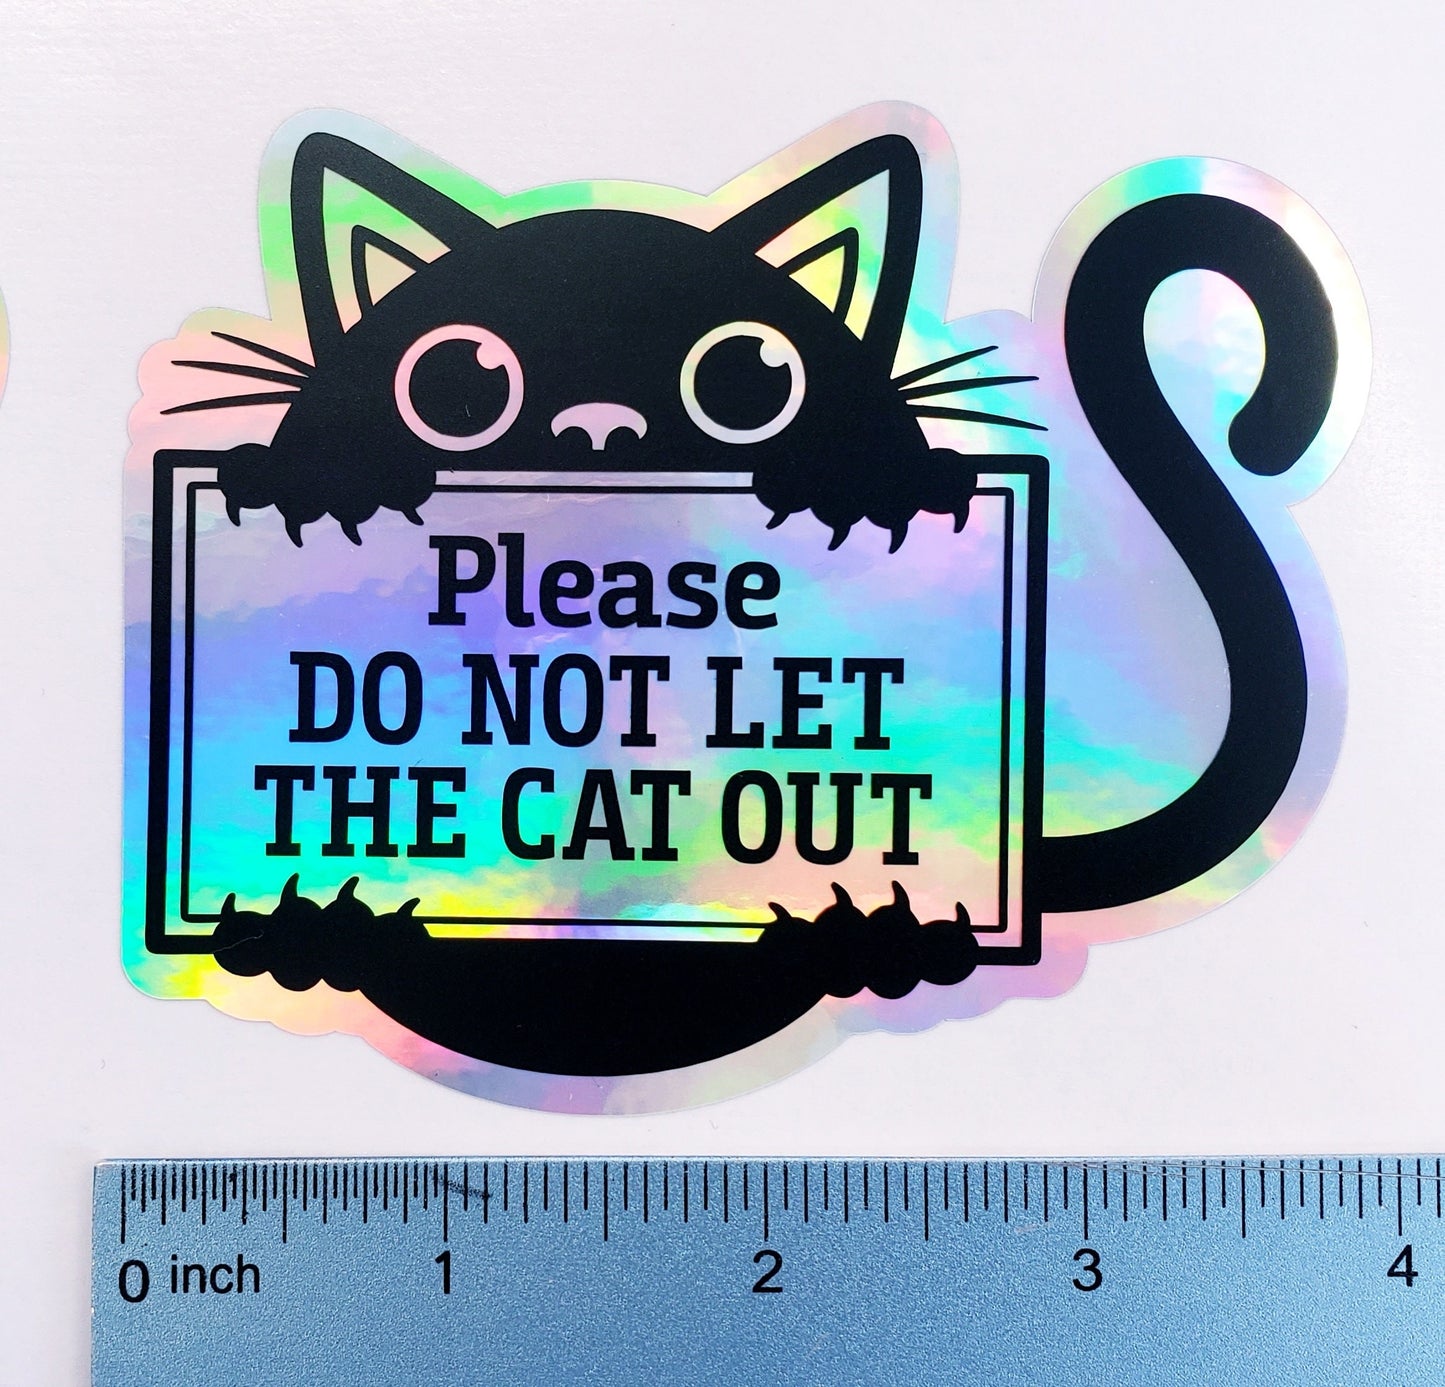 Please Do Not Let the Cat Out Sticker, holographic vinyl sticker